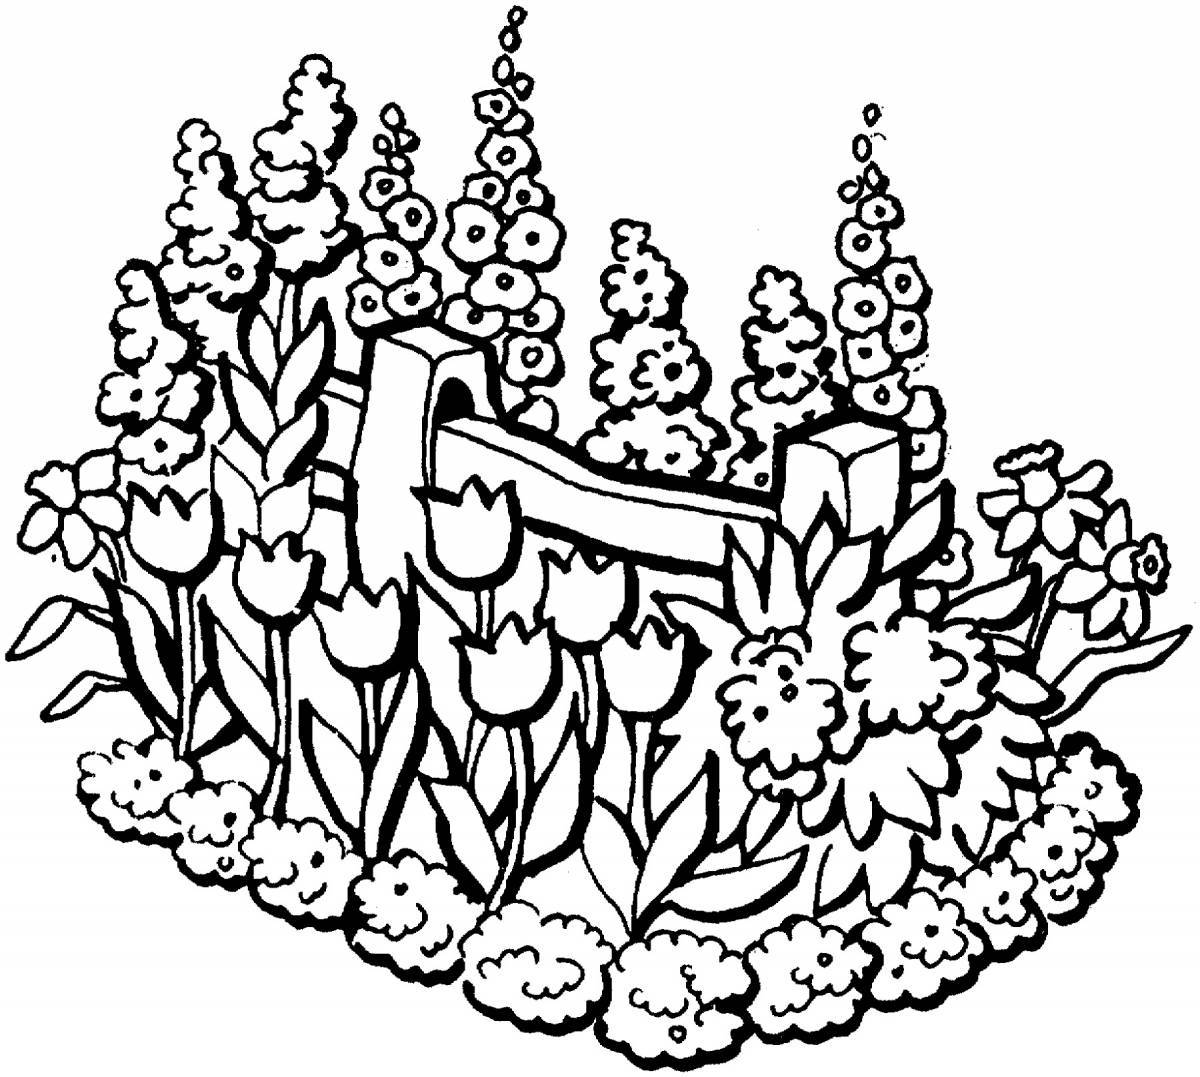 Glowing Garden of Eden coloring page